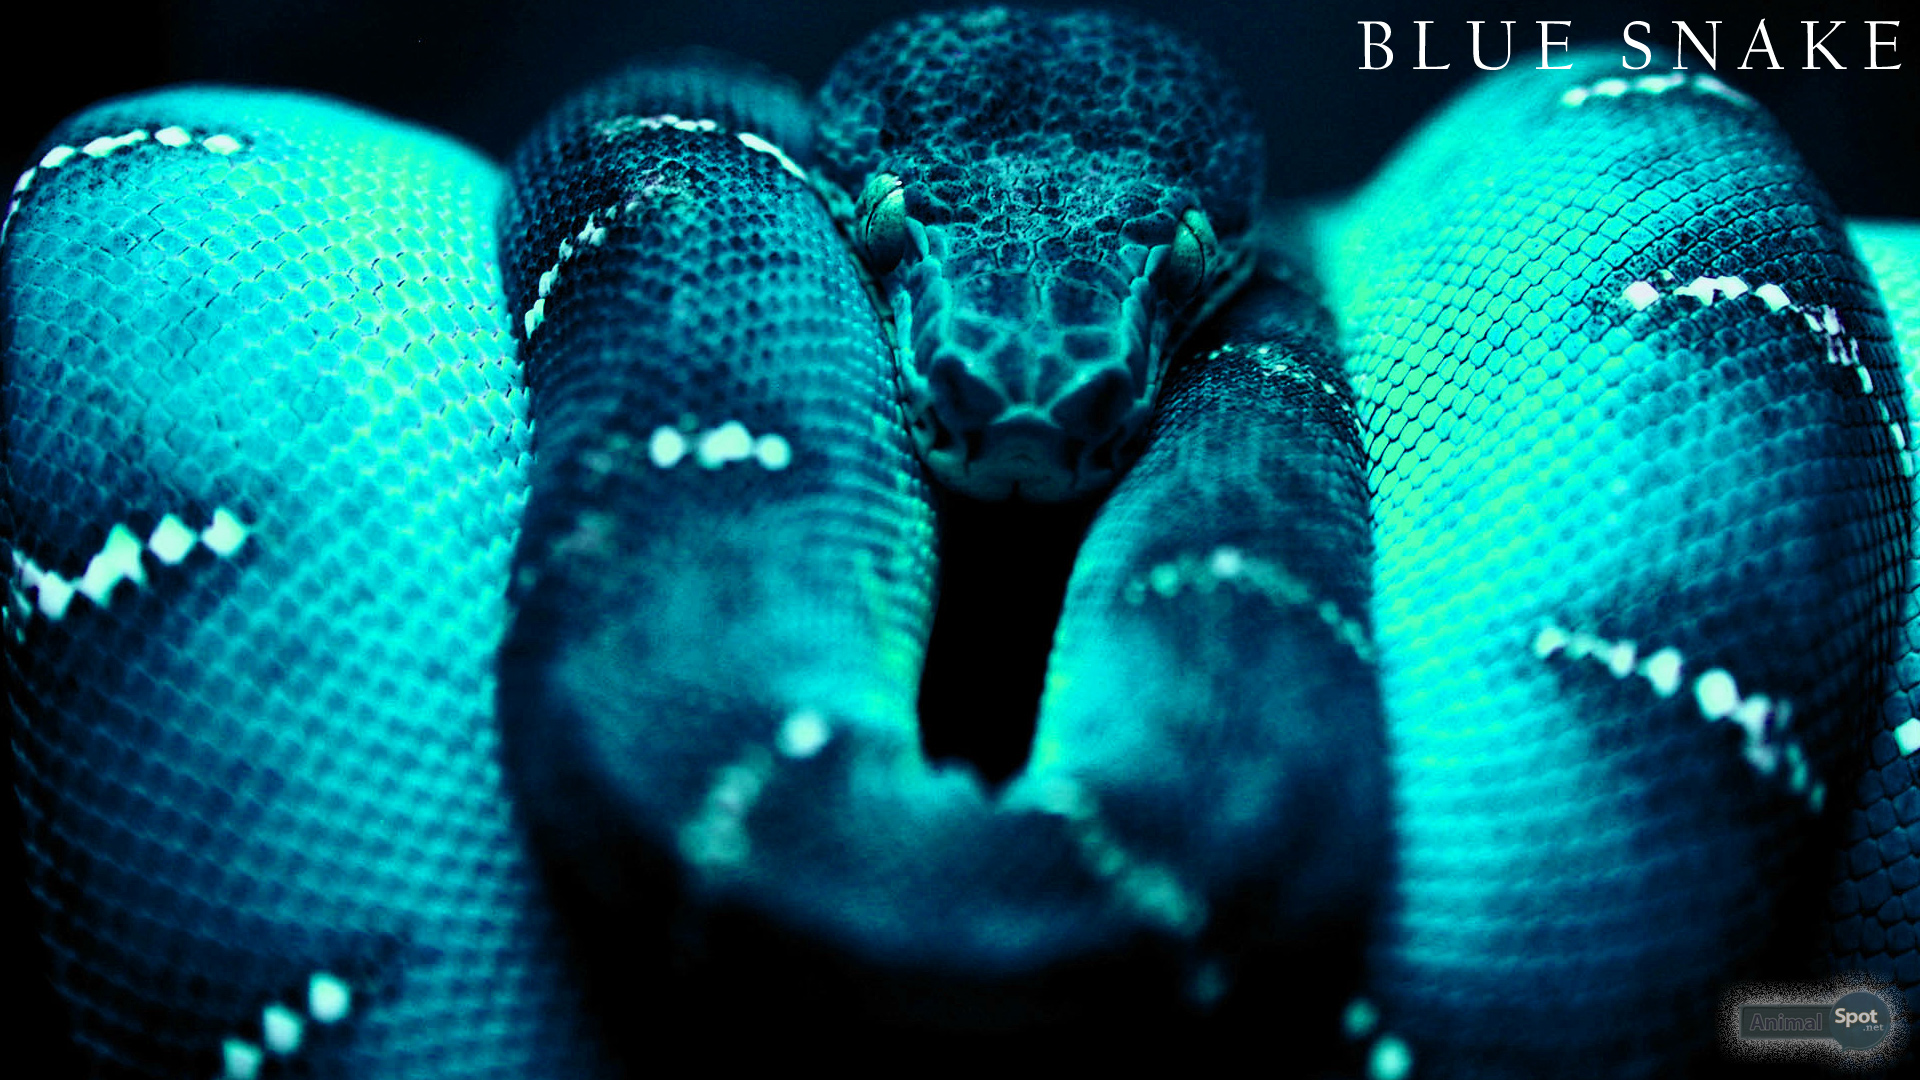 Blue Snake Wallpaper Images amp Pictures   Becuo